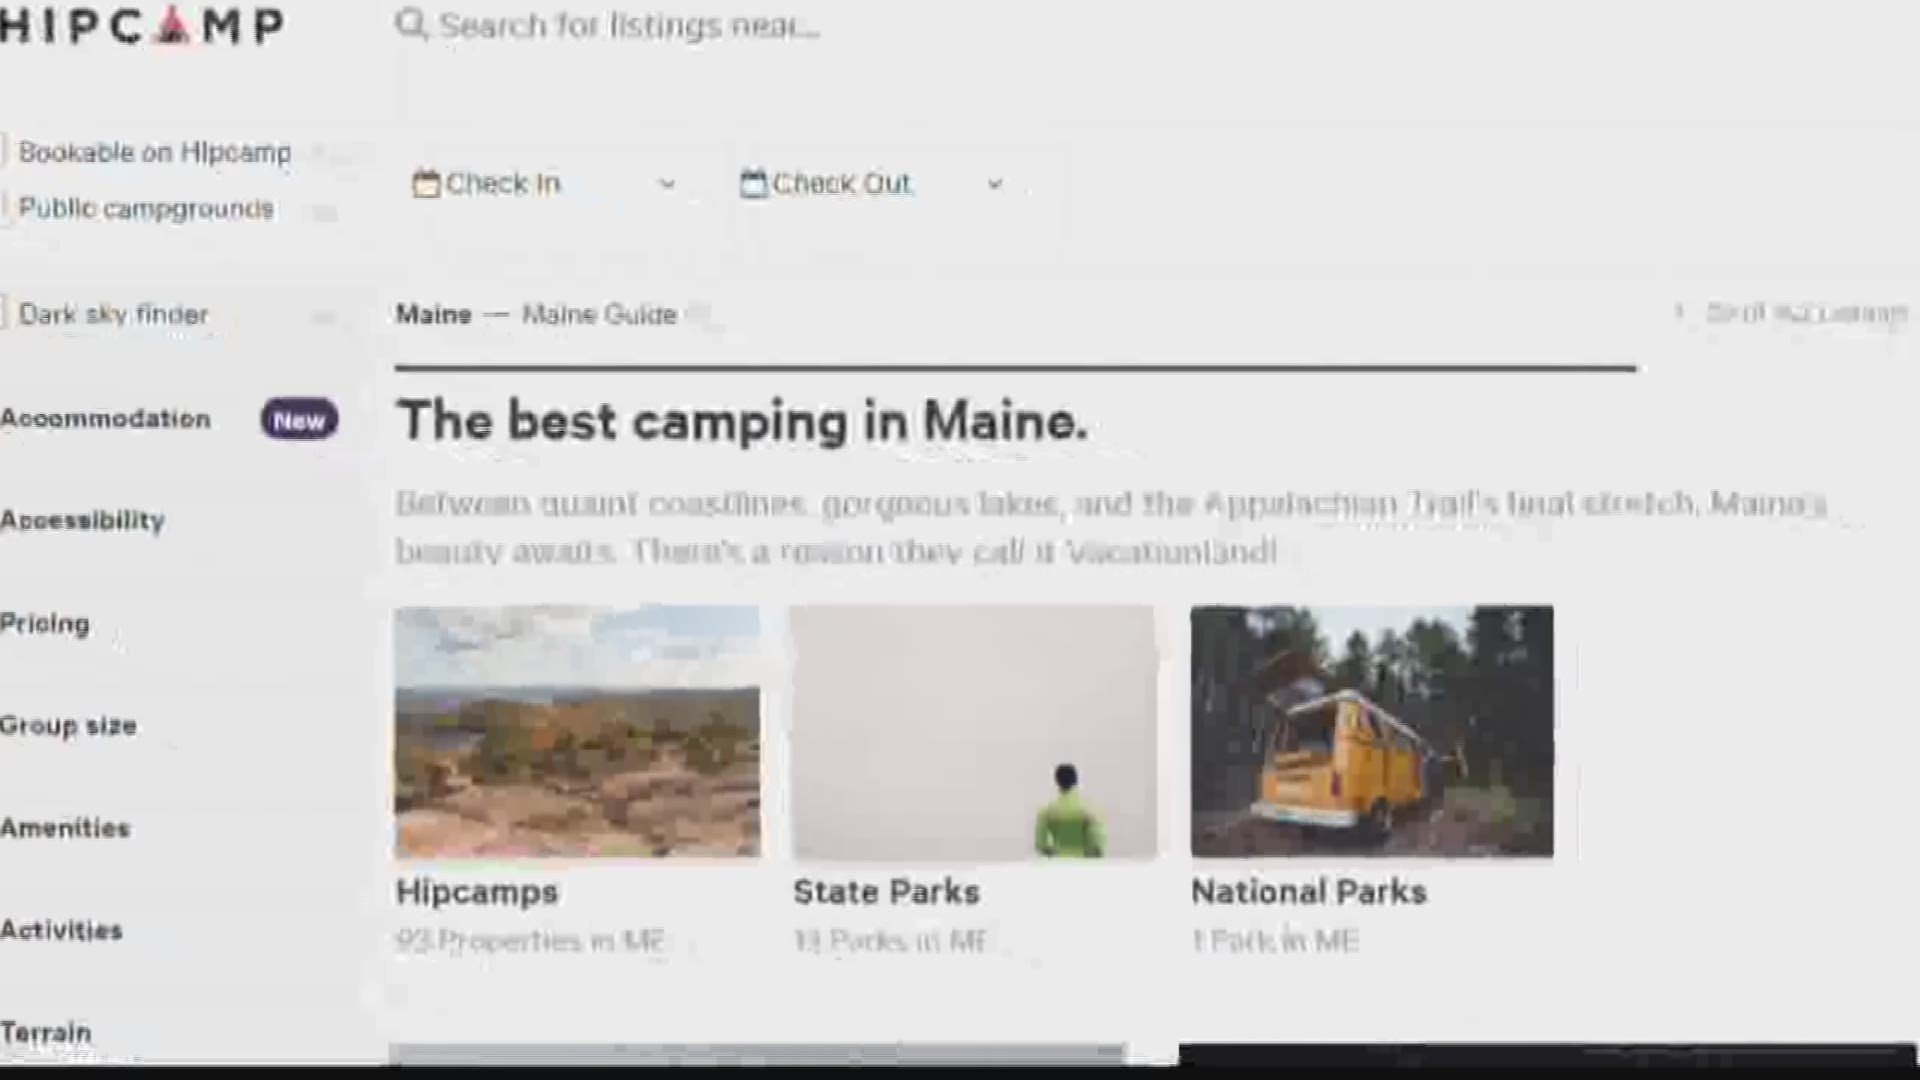 NOW: 'Hipcamping' in Maine